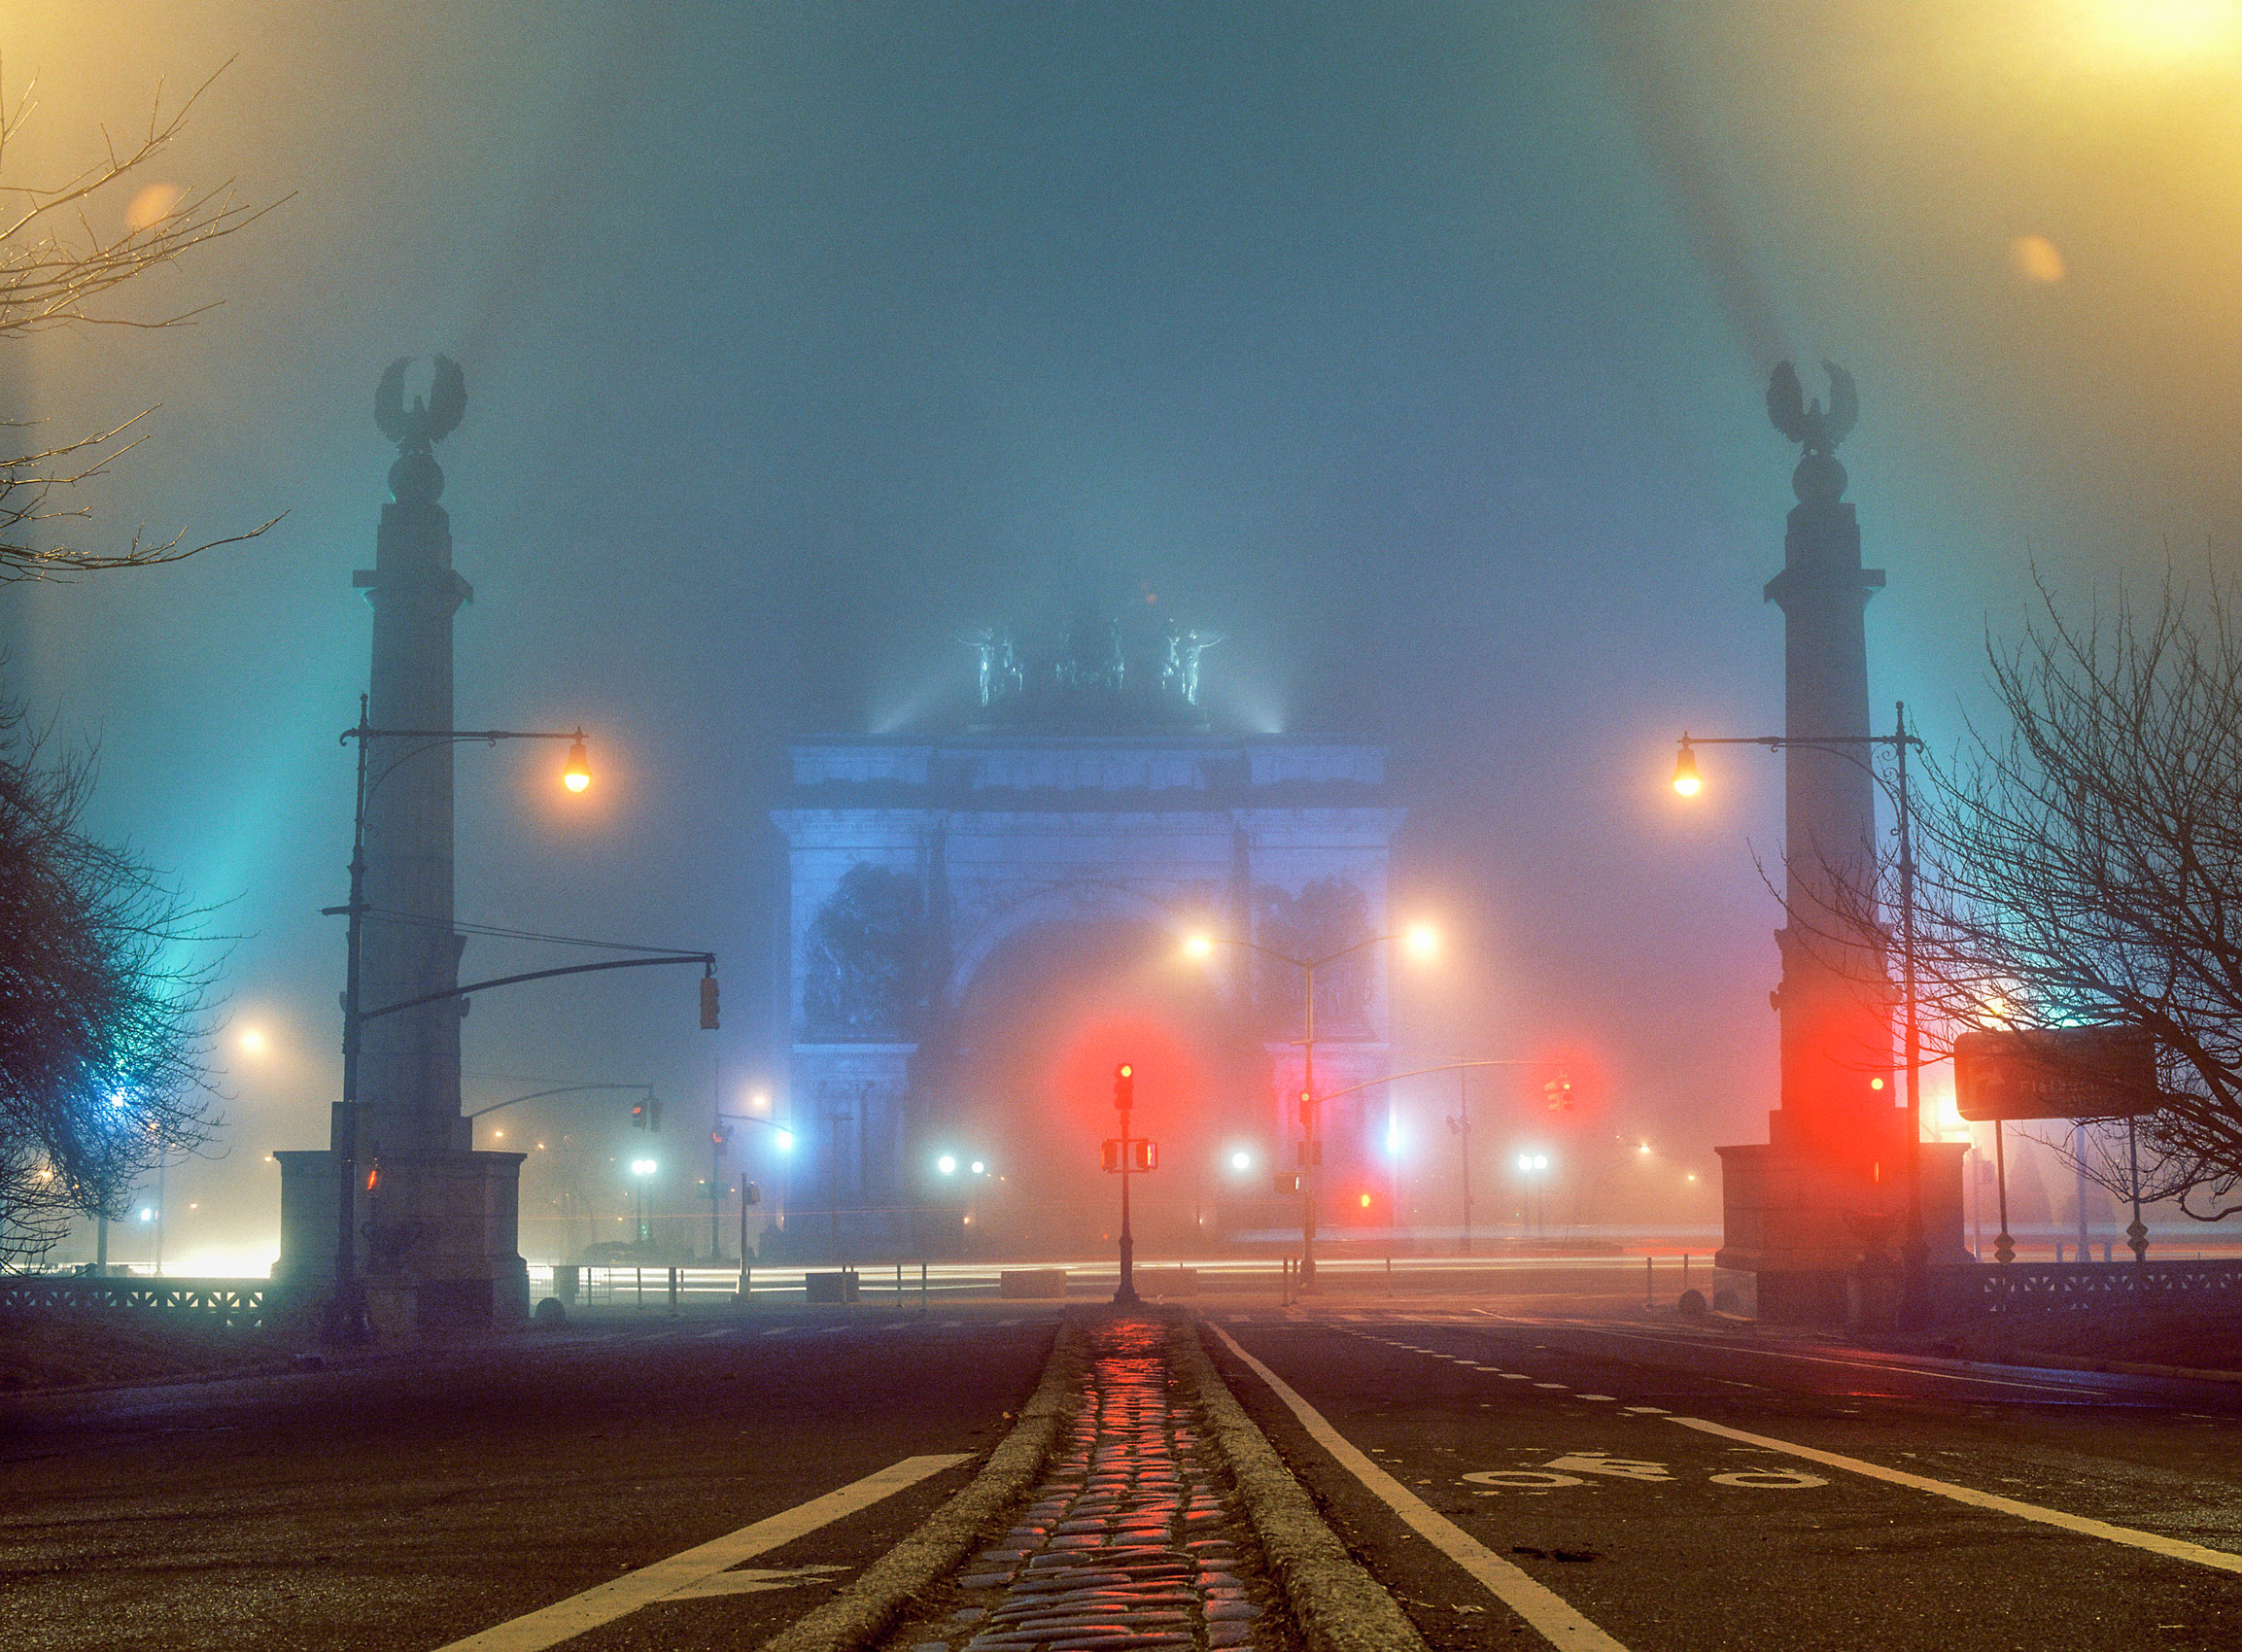 A-NIGHT-SHOT-OF-GRAND-ARMY-PLAZA-SHROUDED-BY-THE-MISTY-STREET-LIGHTS